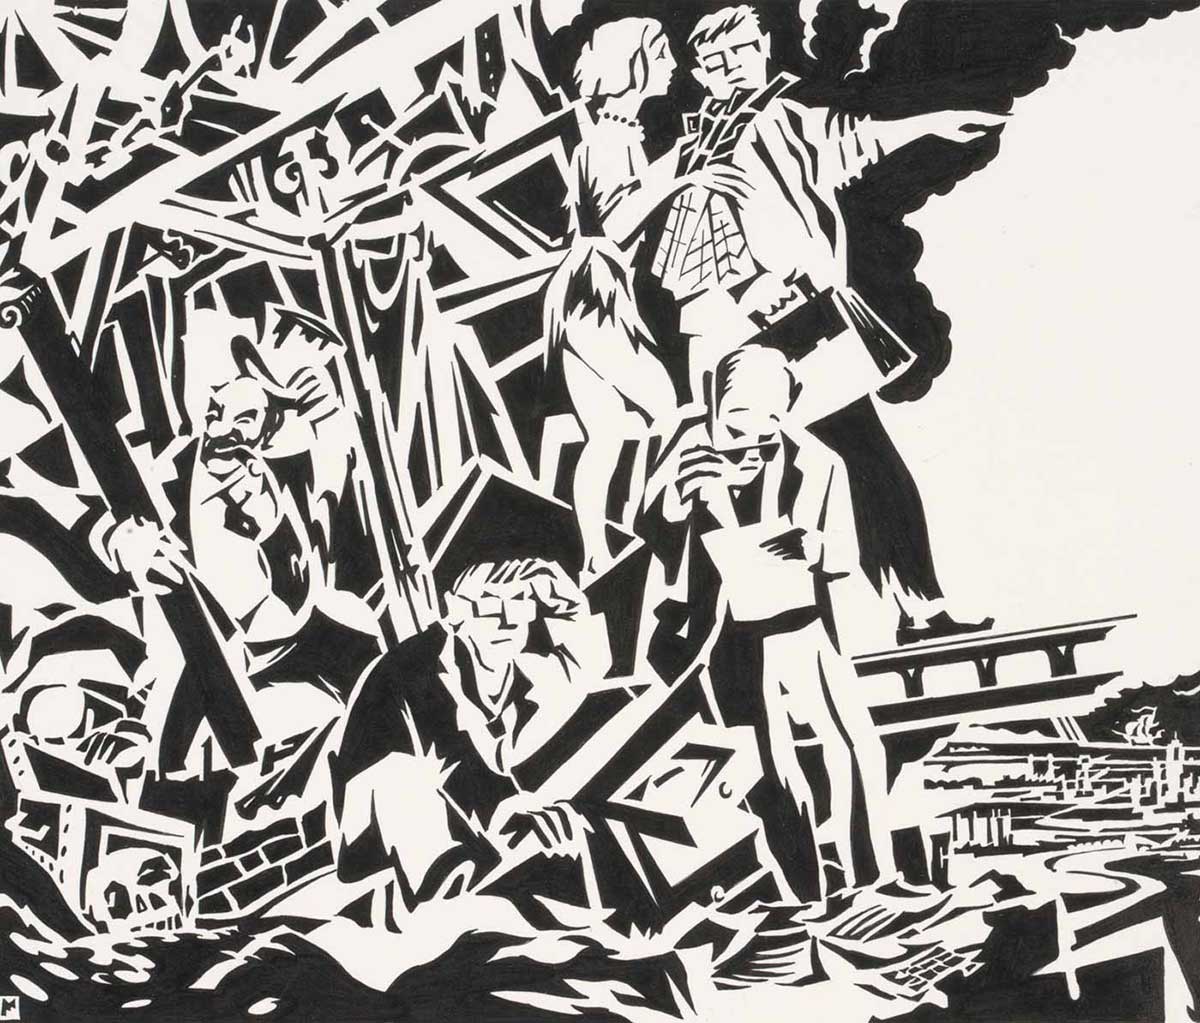 A black and white illustration showing people emerging from a wrecked building. The group includes a traditional banker figure lifting his top hat; and a man carrying a briefcase and a woman with a folded plan, both dressed in ratty clothing, pointing away from the scene.  - click to view larger image